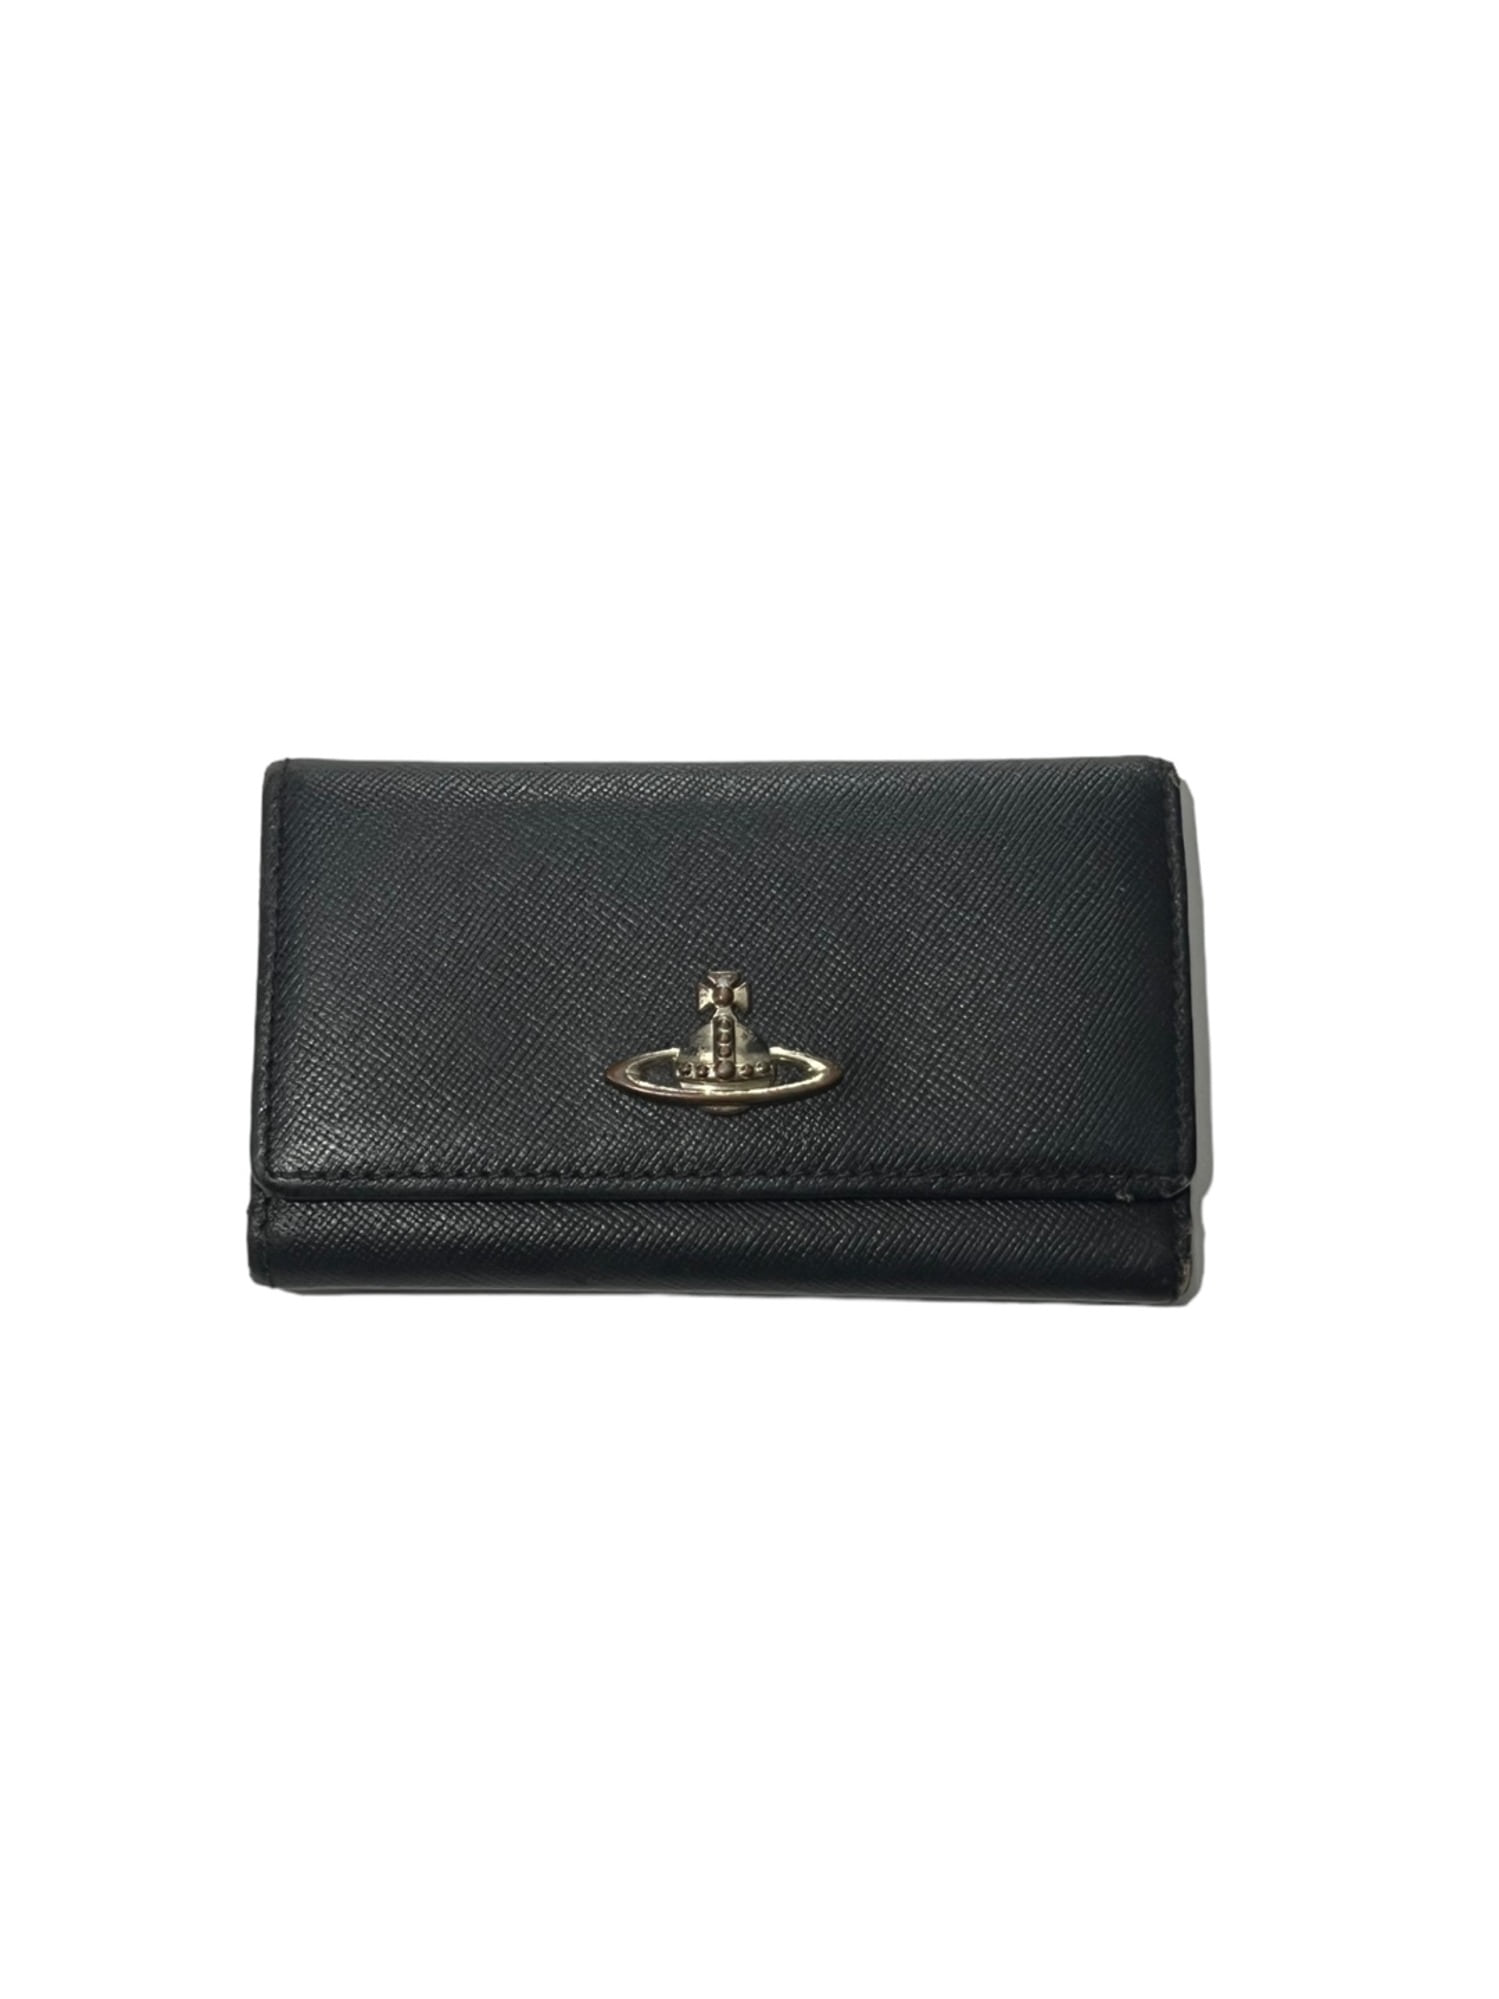 Vivienne Wsetwood Logo Leather Key Case Wallet (Condition 8/10)